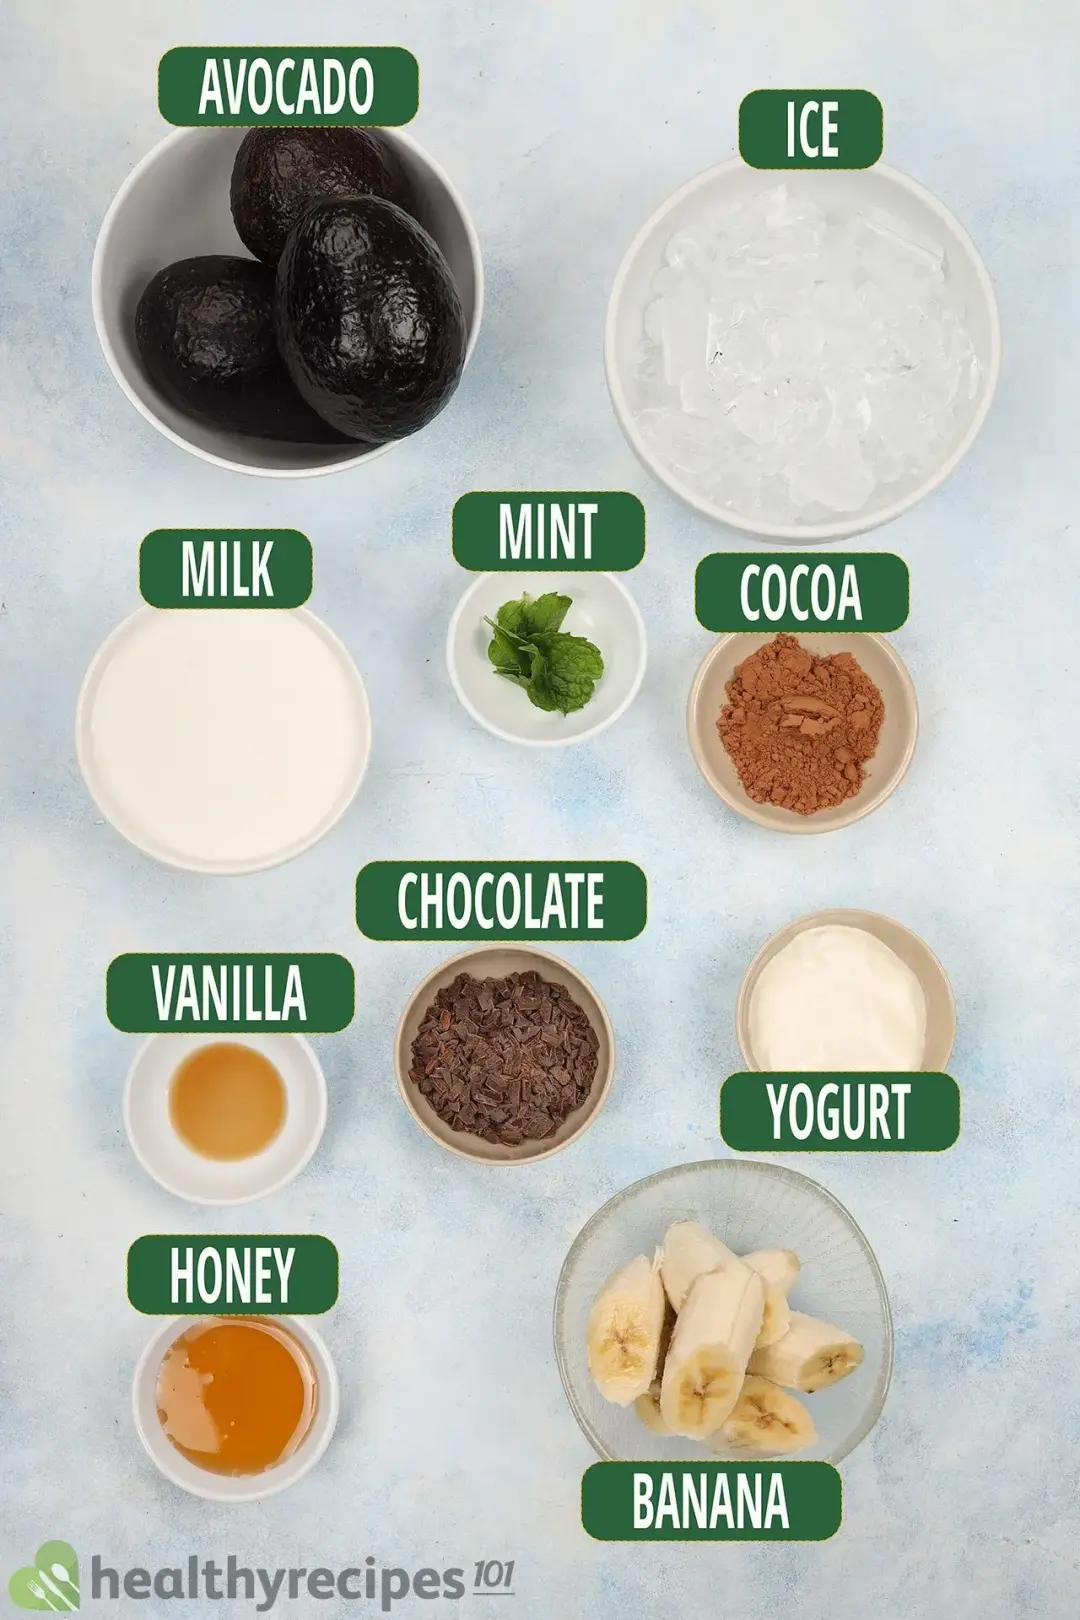 Ingredients for Chocolate Avocado Smoothie